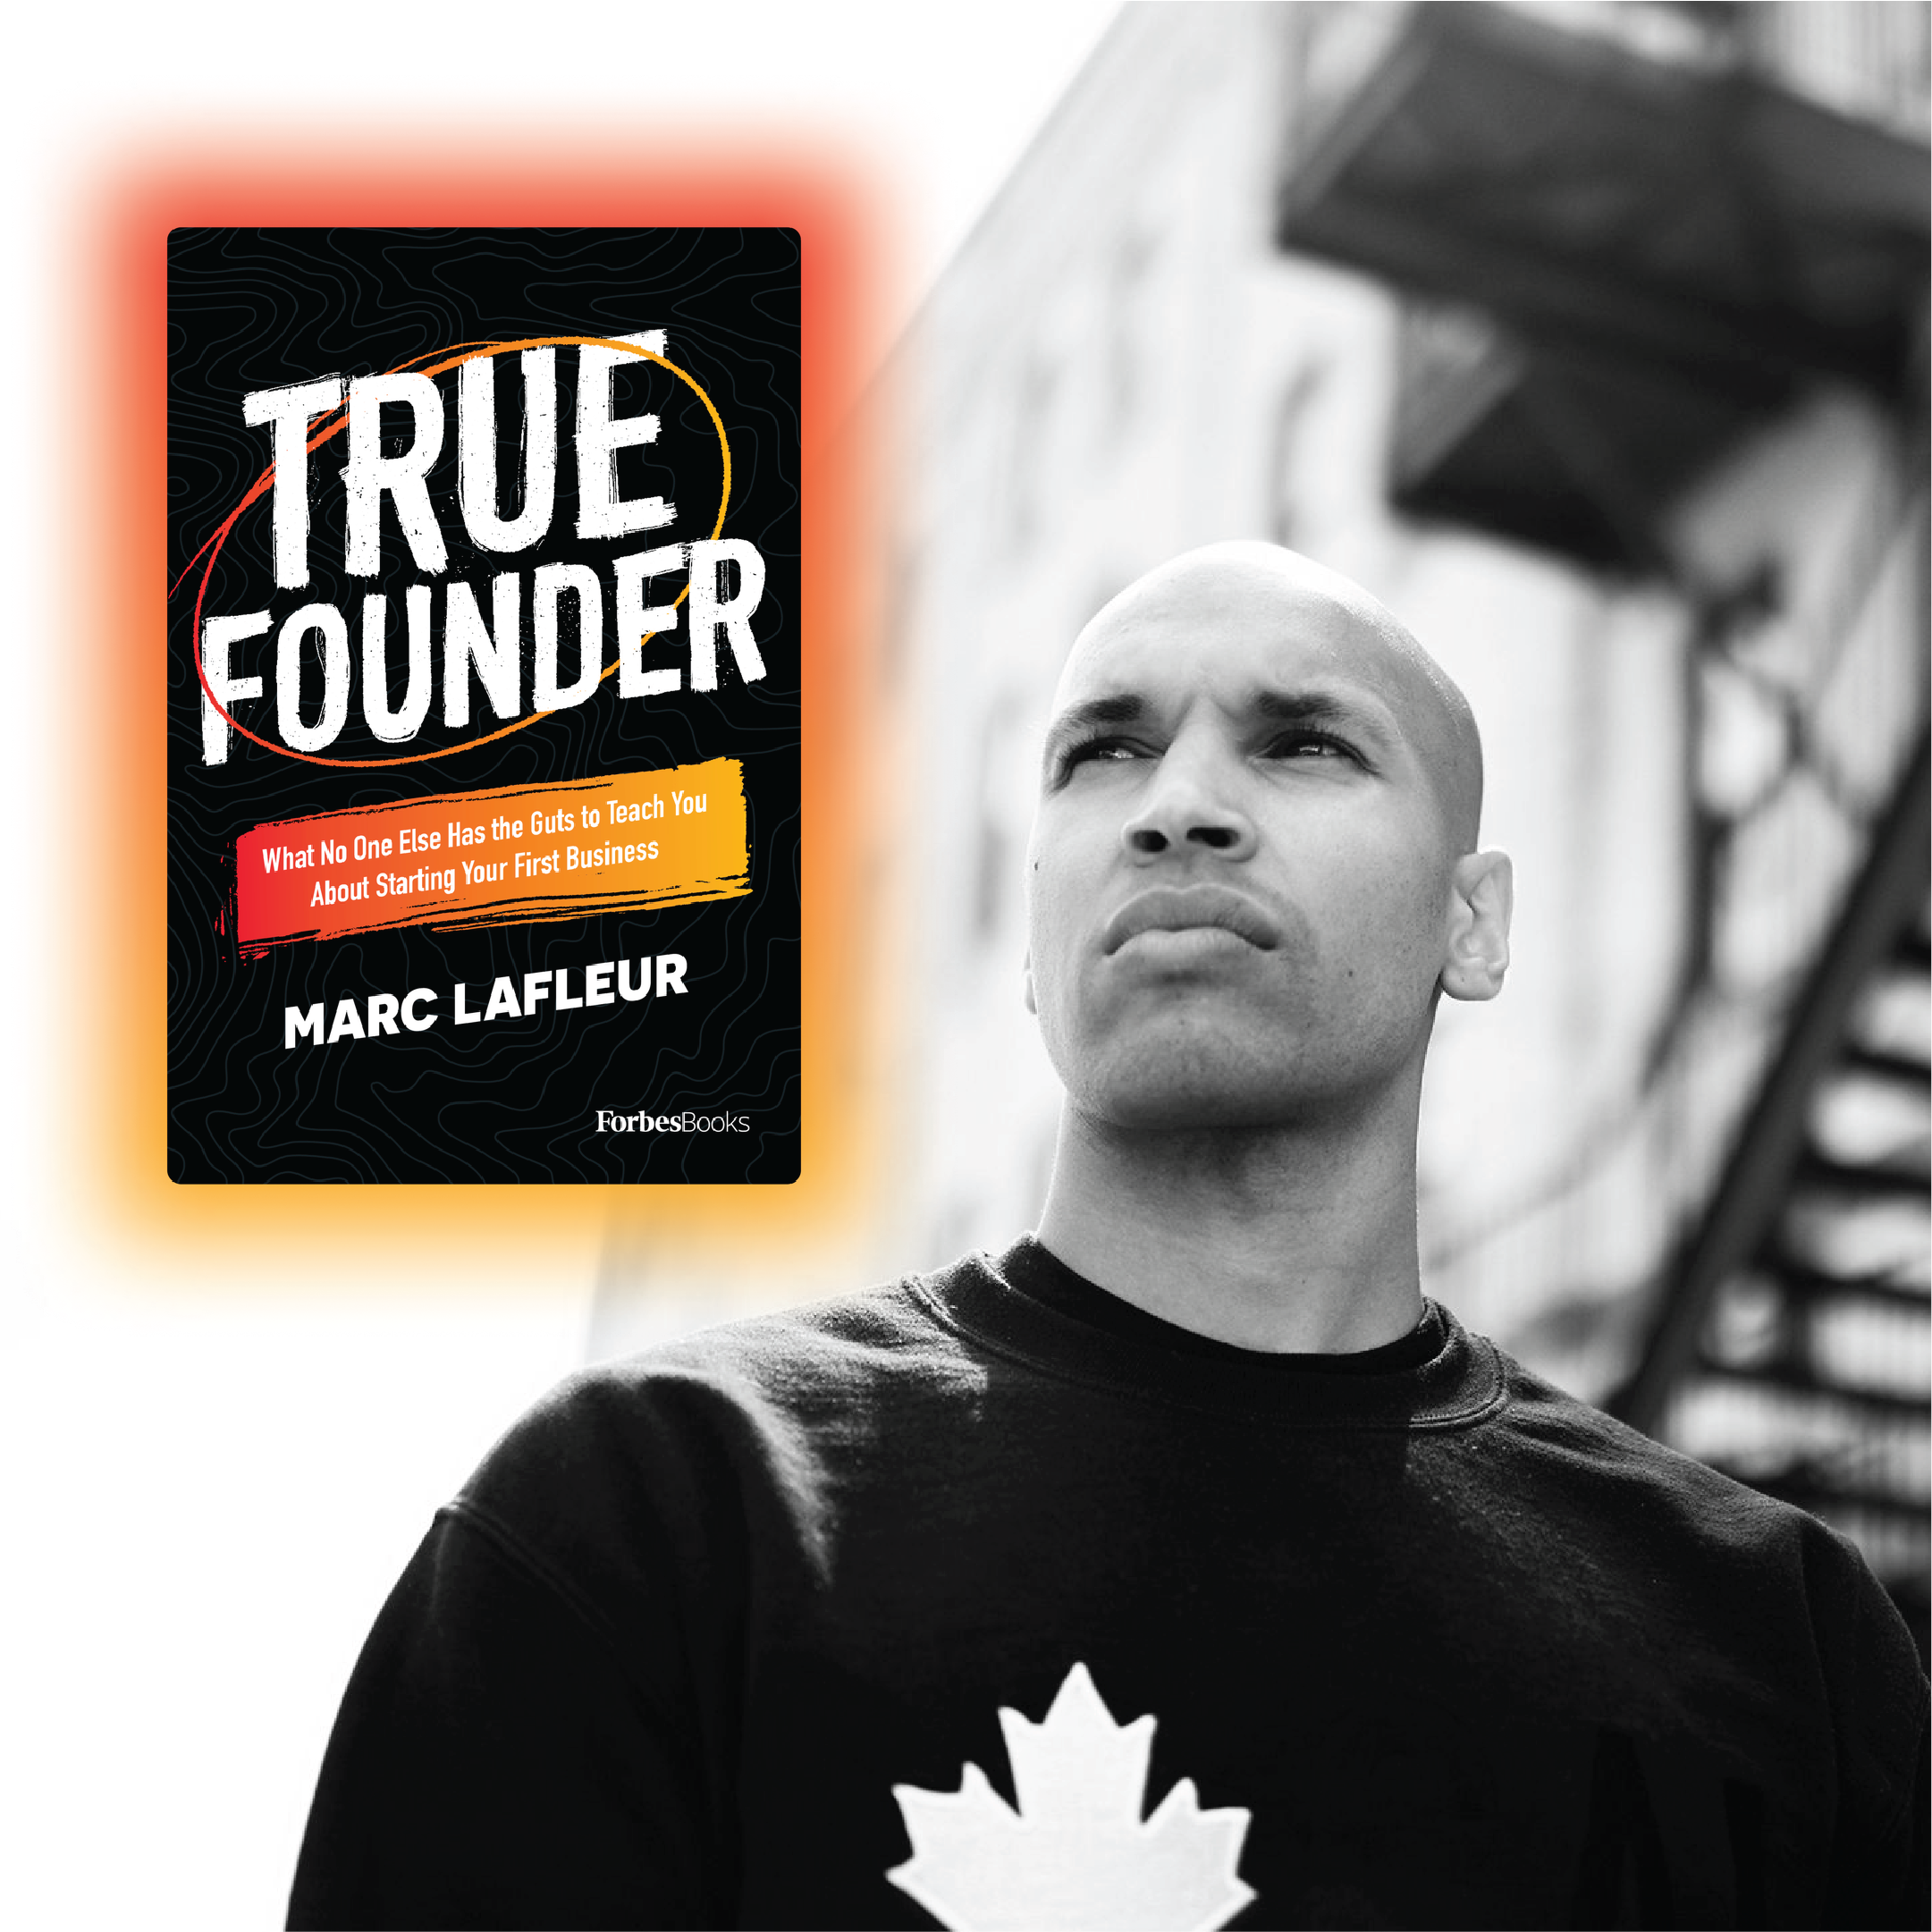 Marc Lafleur with the cover of the True Founder book.